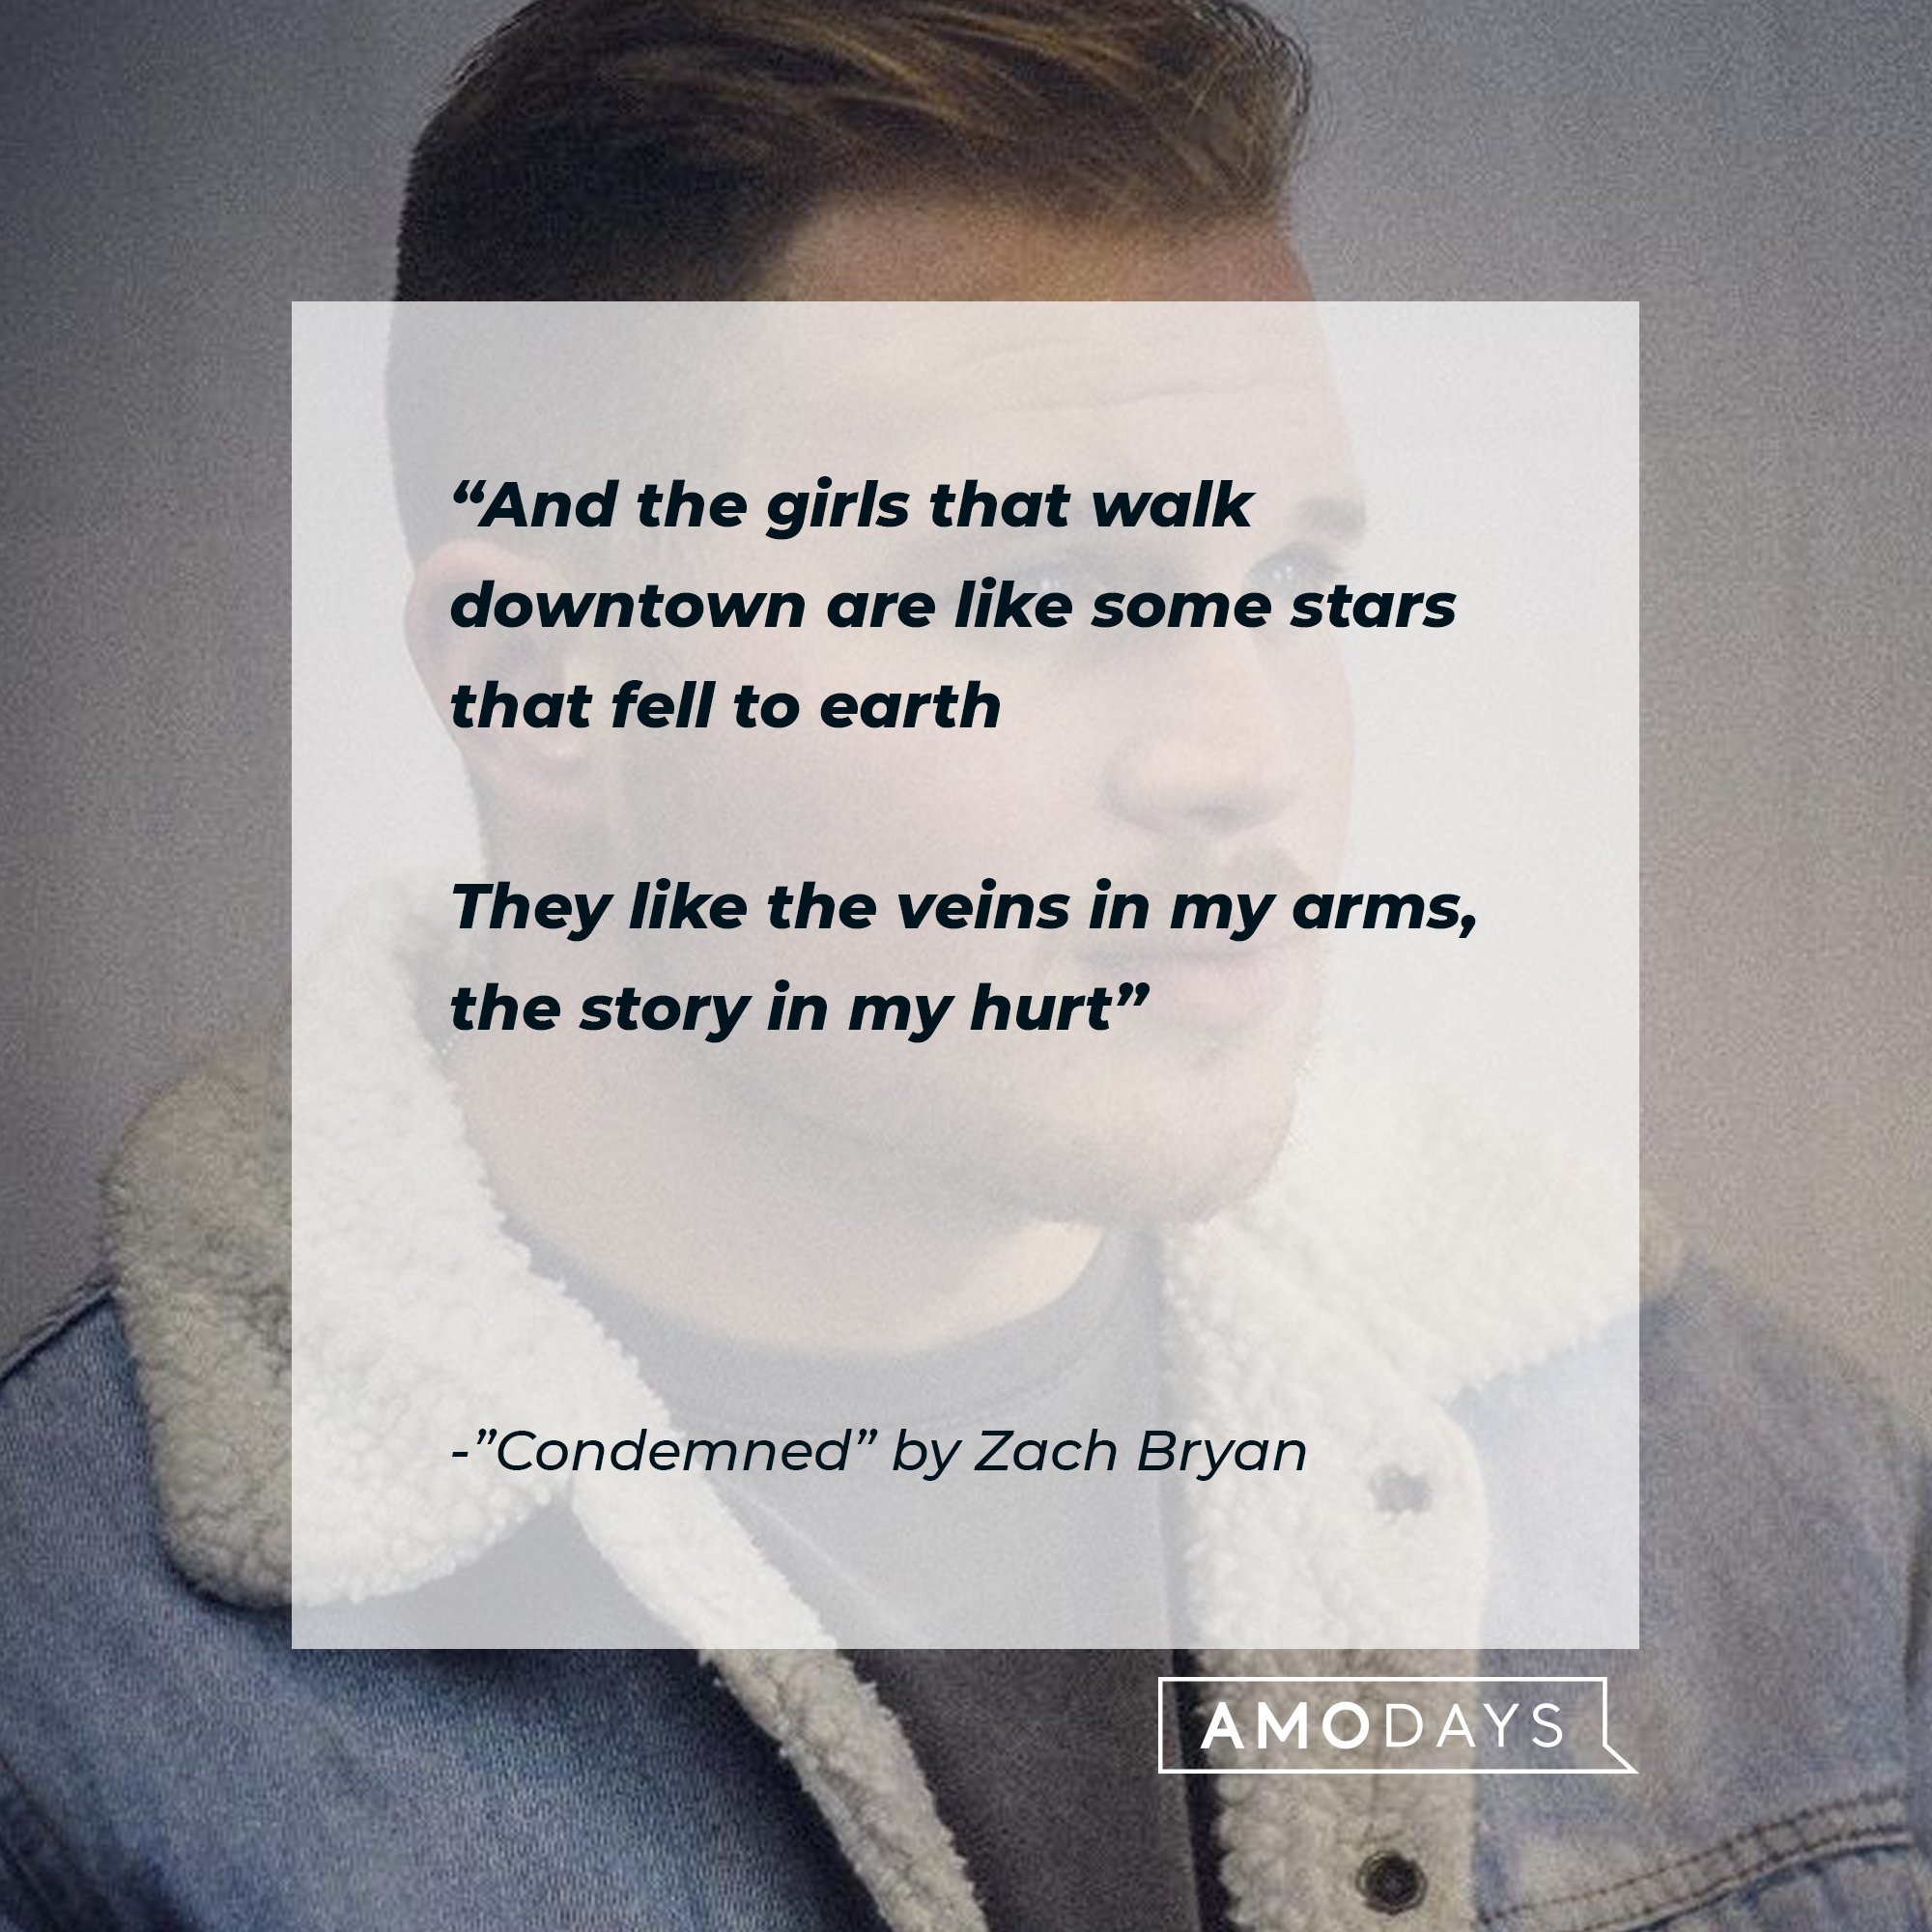  Zach Bryan’s quote from "Condemned": “And the girls that walk downtown are like some stars that fell to earth/ They like the veins in my arms, the story in my hurt” |Image: AmoDays